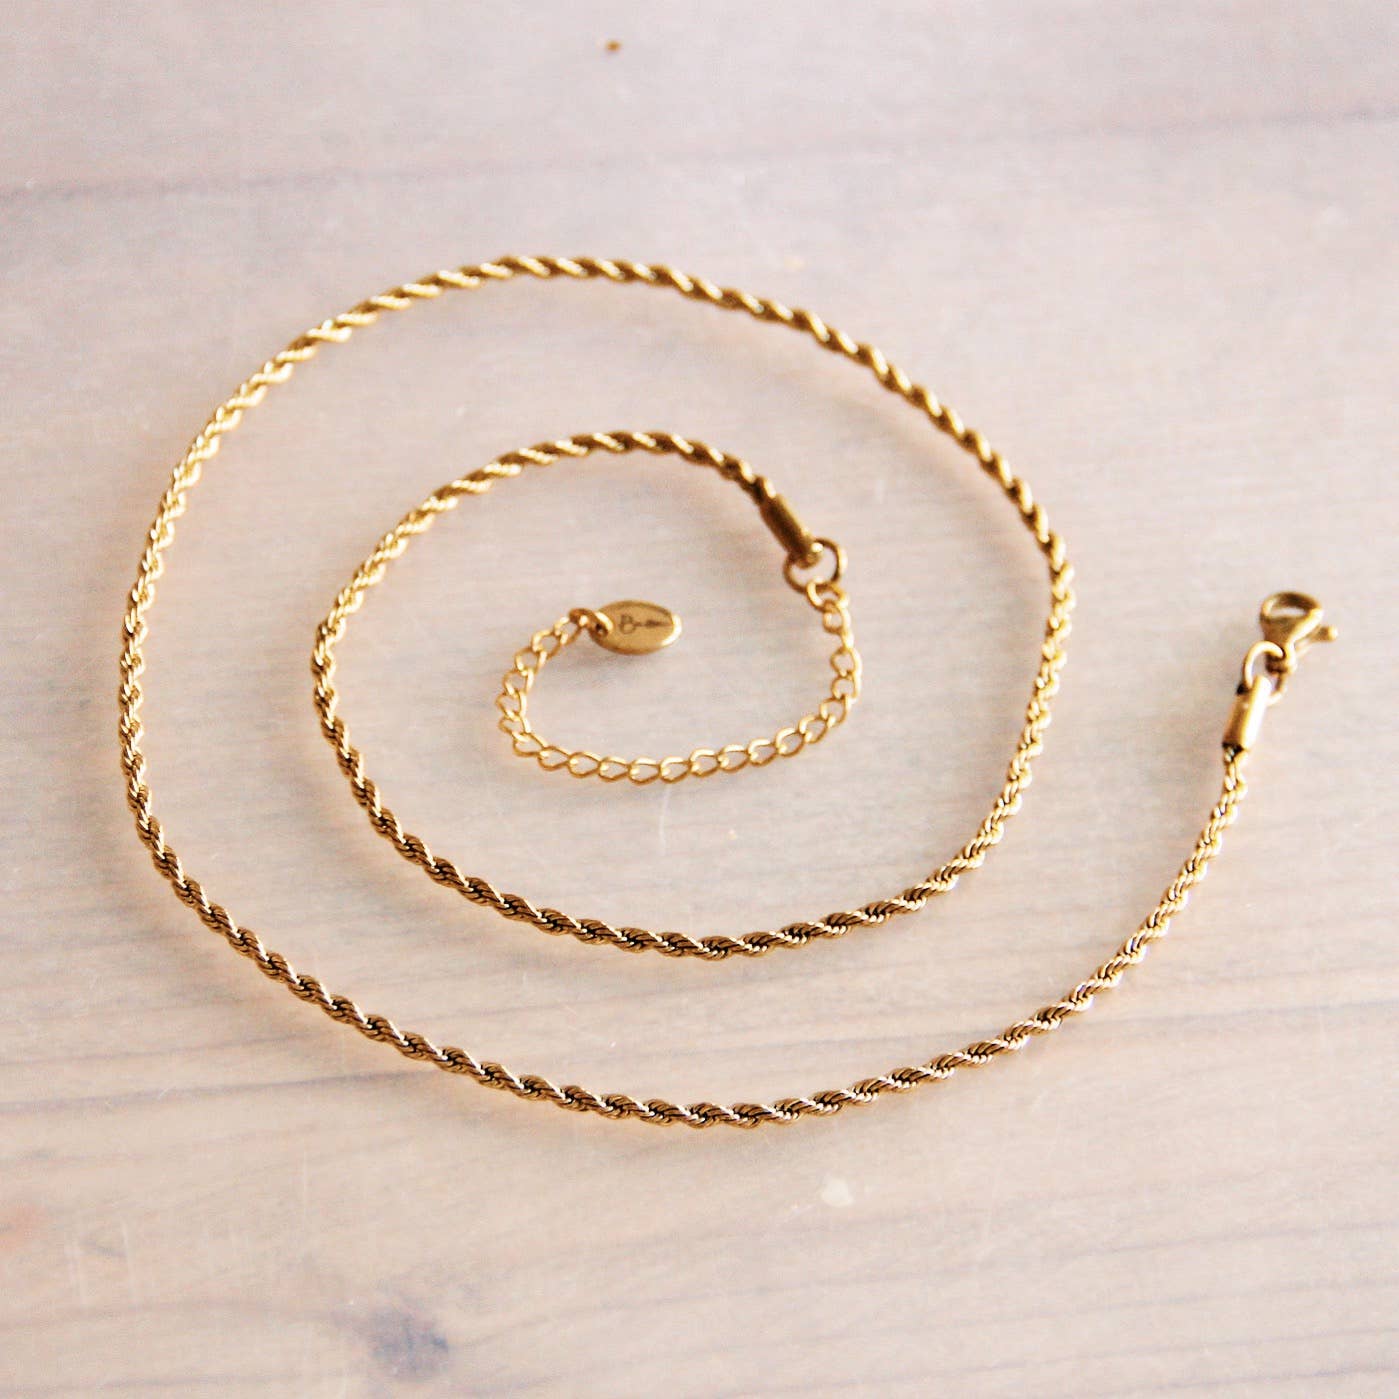 Stainless steel fine twisted necklace